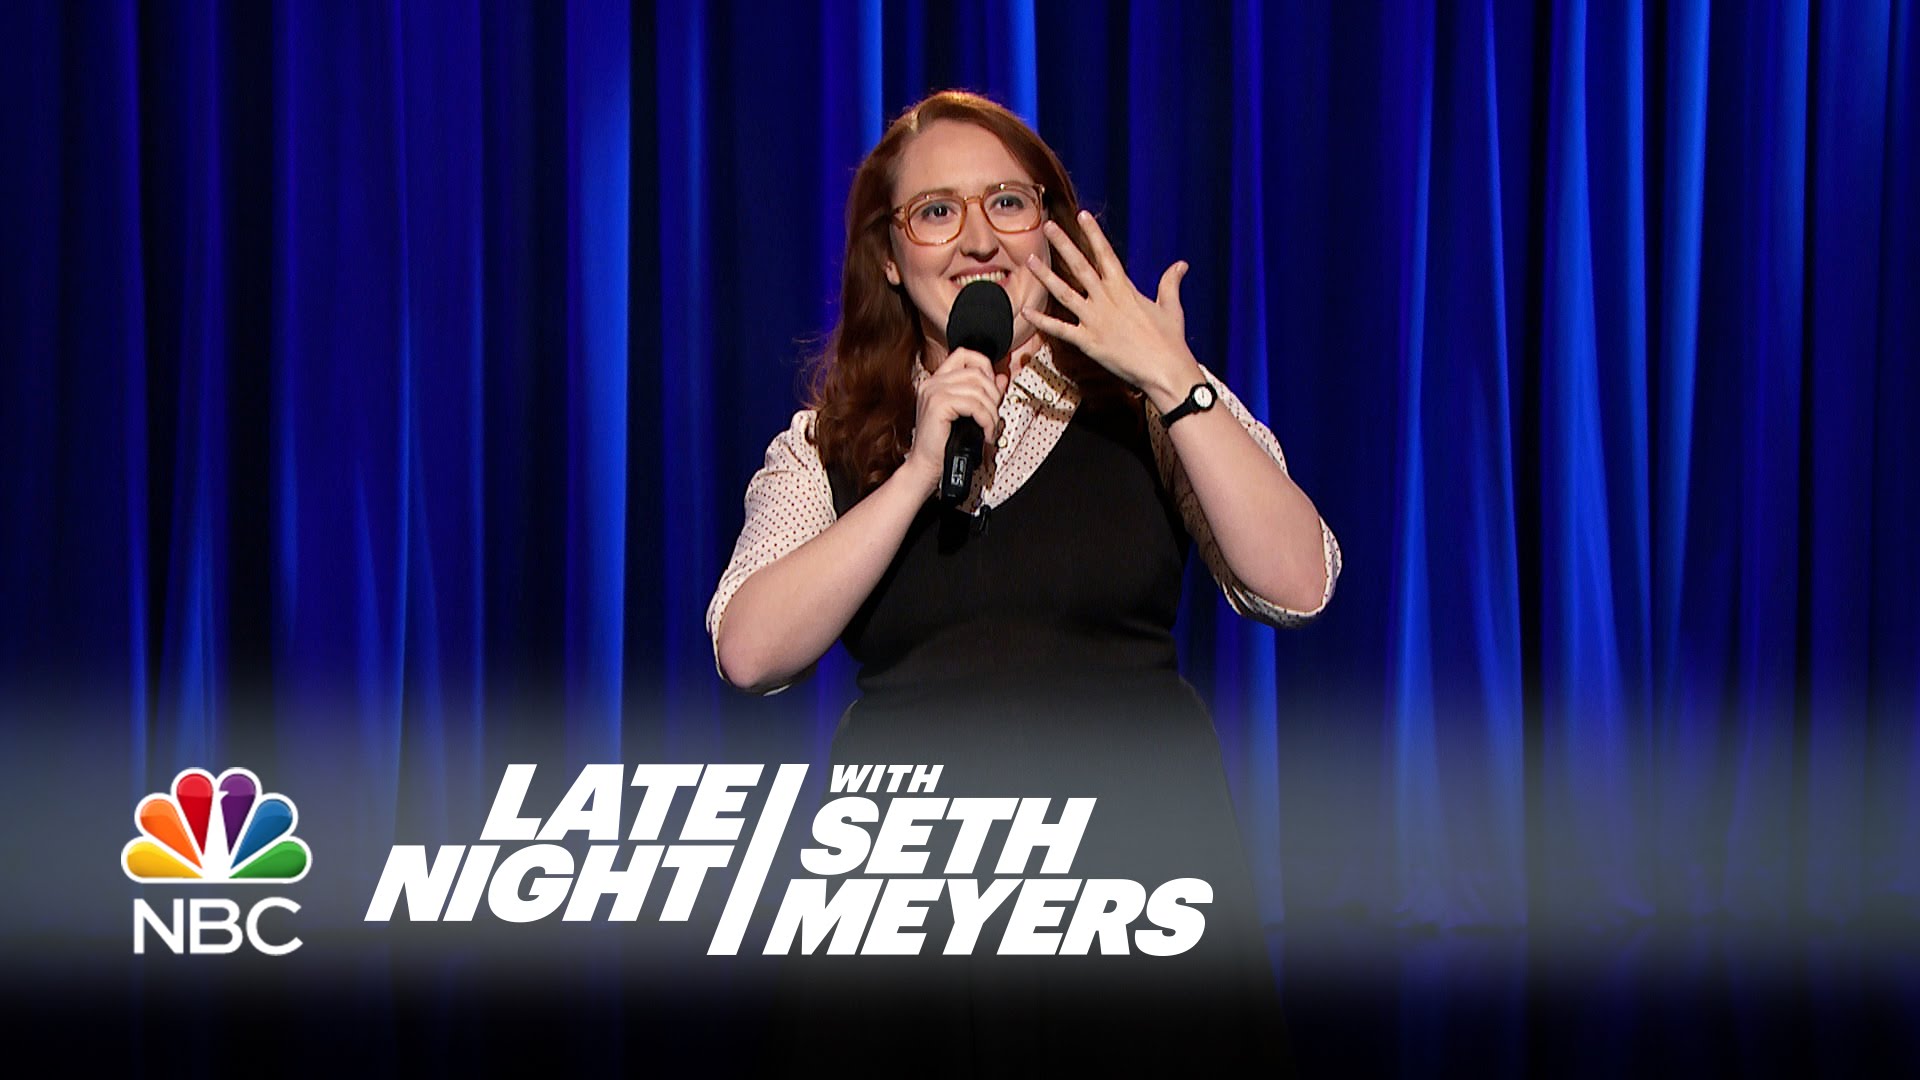 Emily Heller on Late Night with Seth Meyers